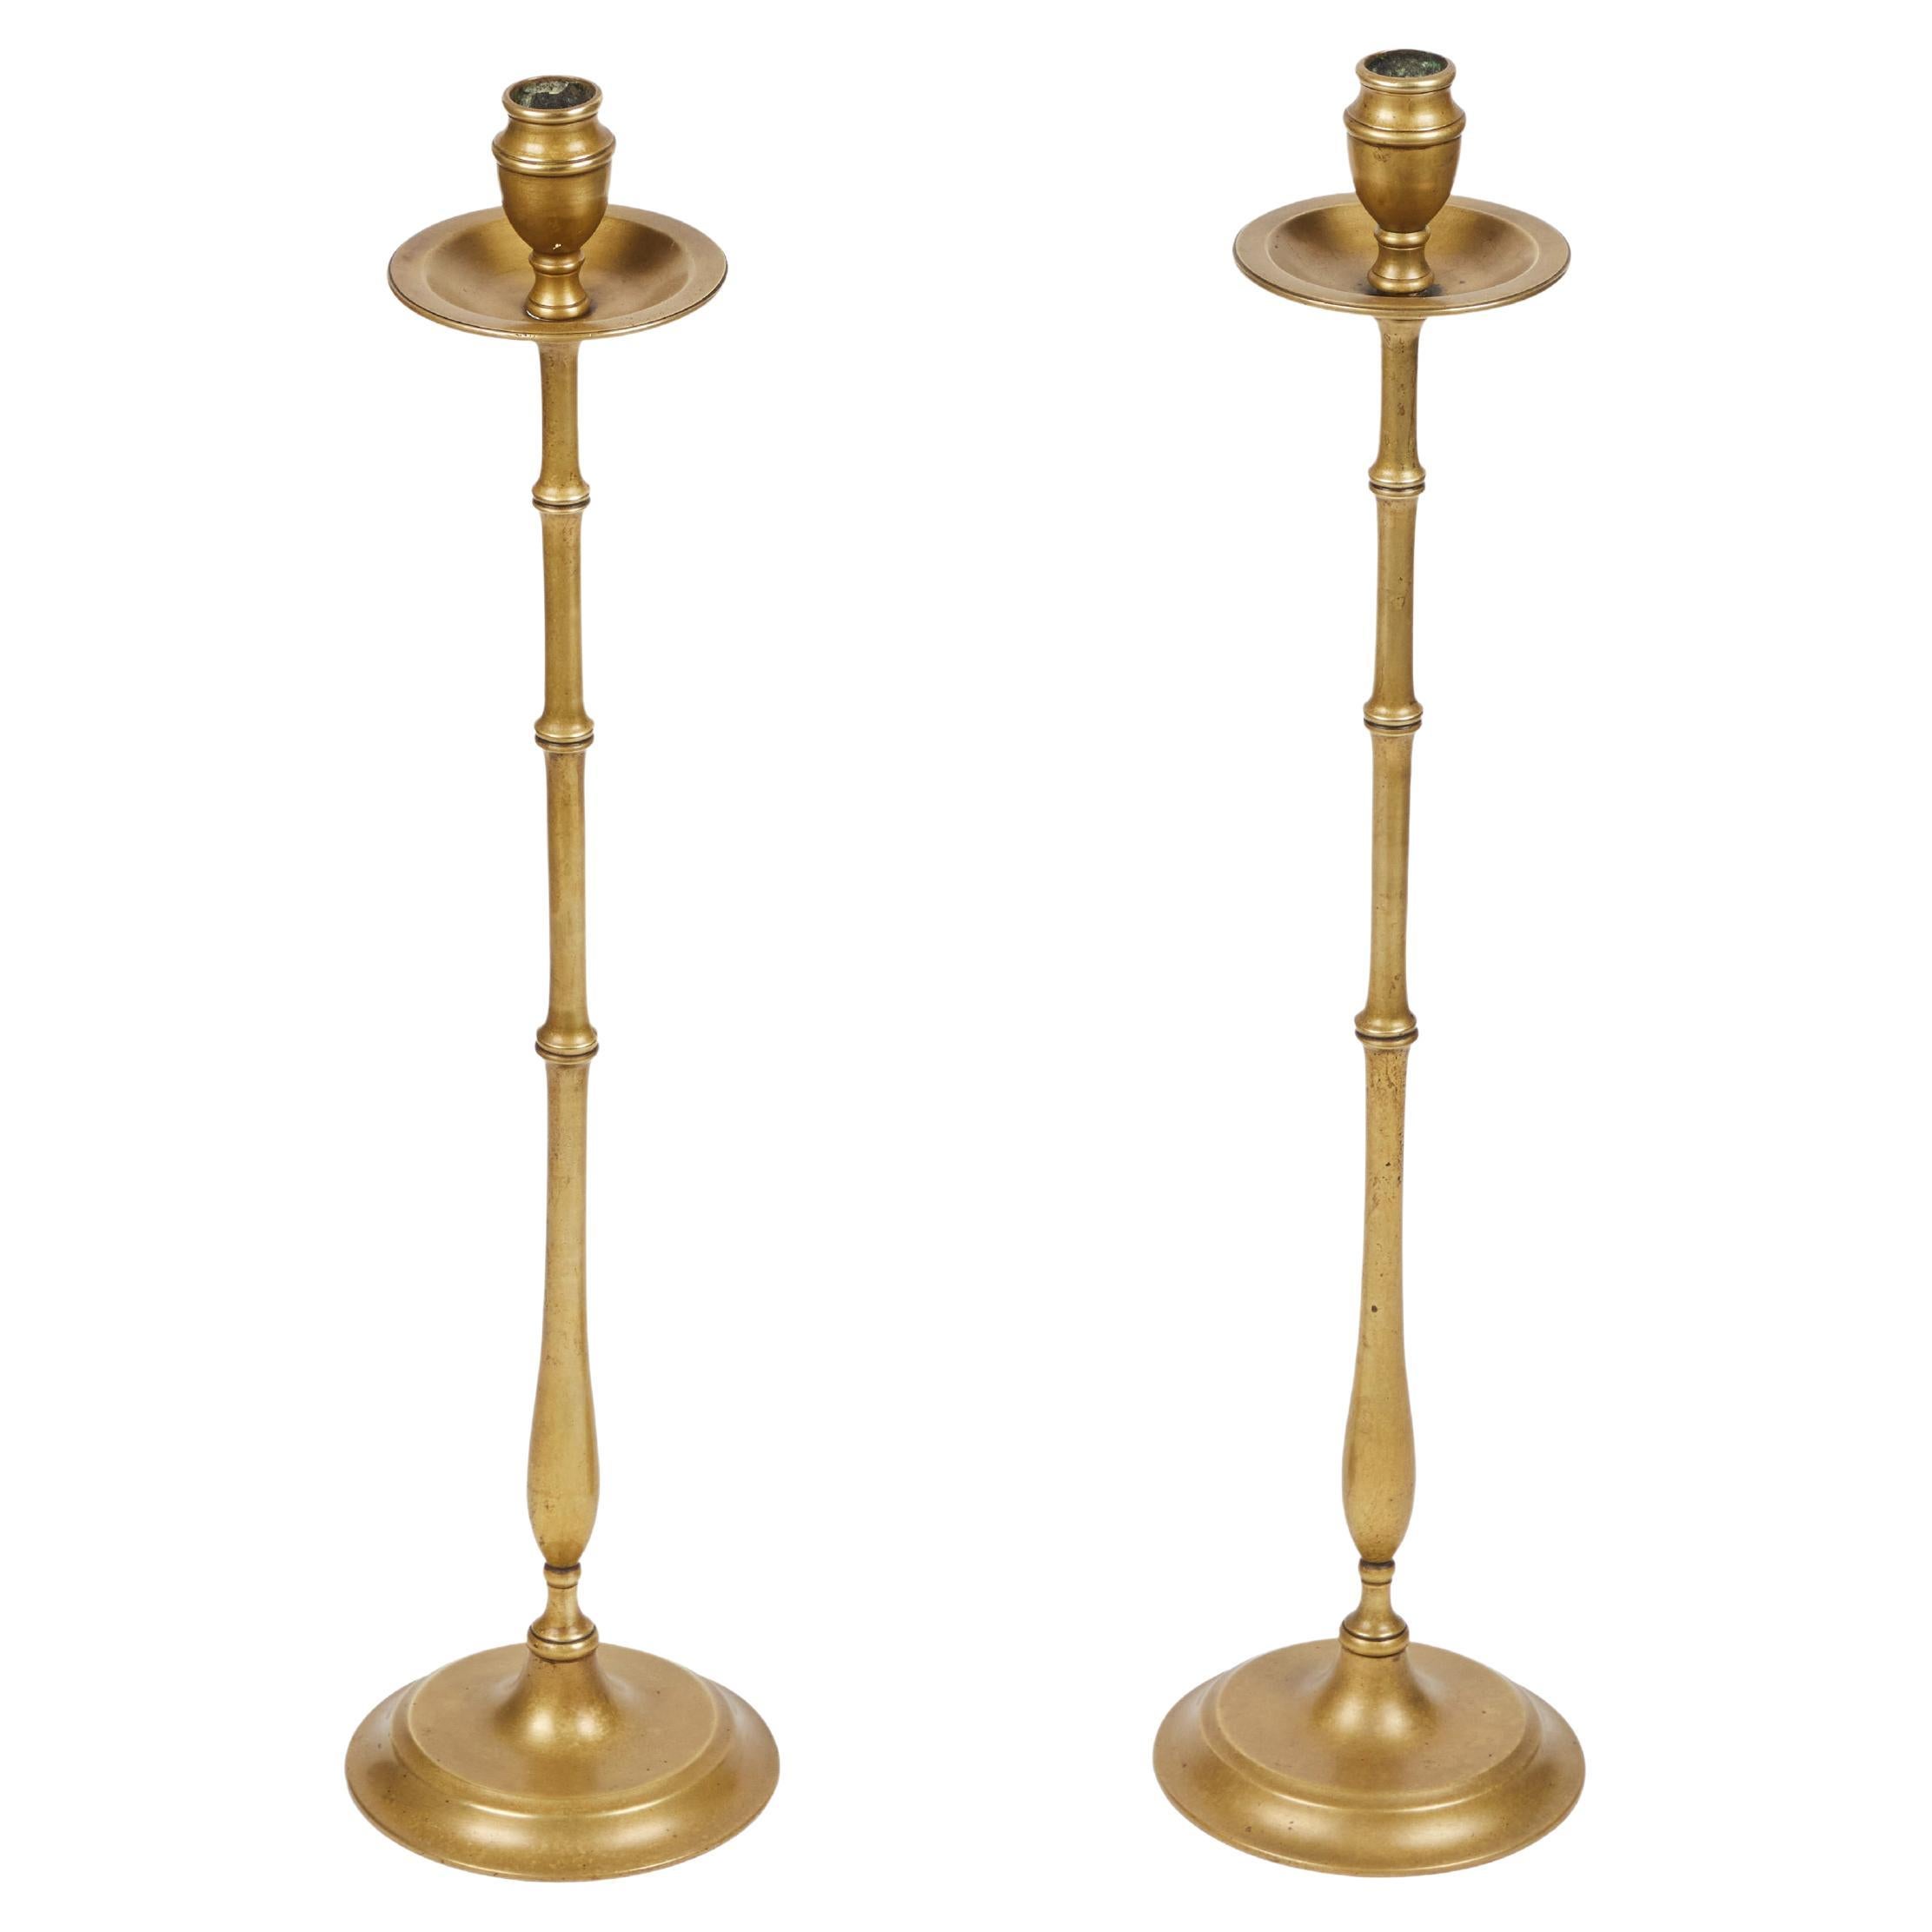 Pair of Vintage Tall Faux Bamboo Brass Candlesticks, England 